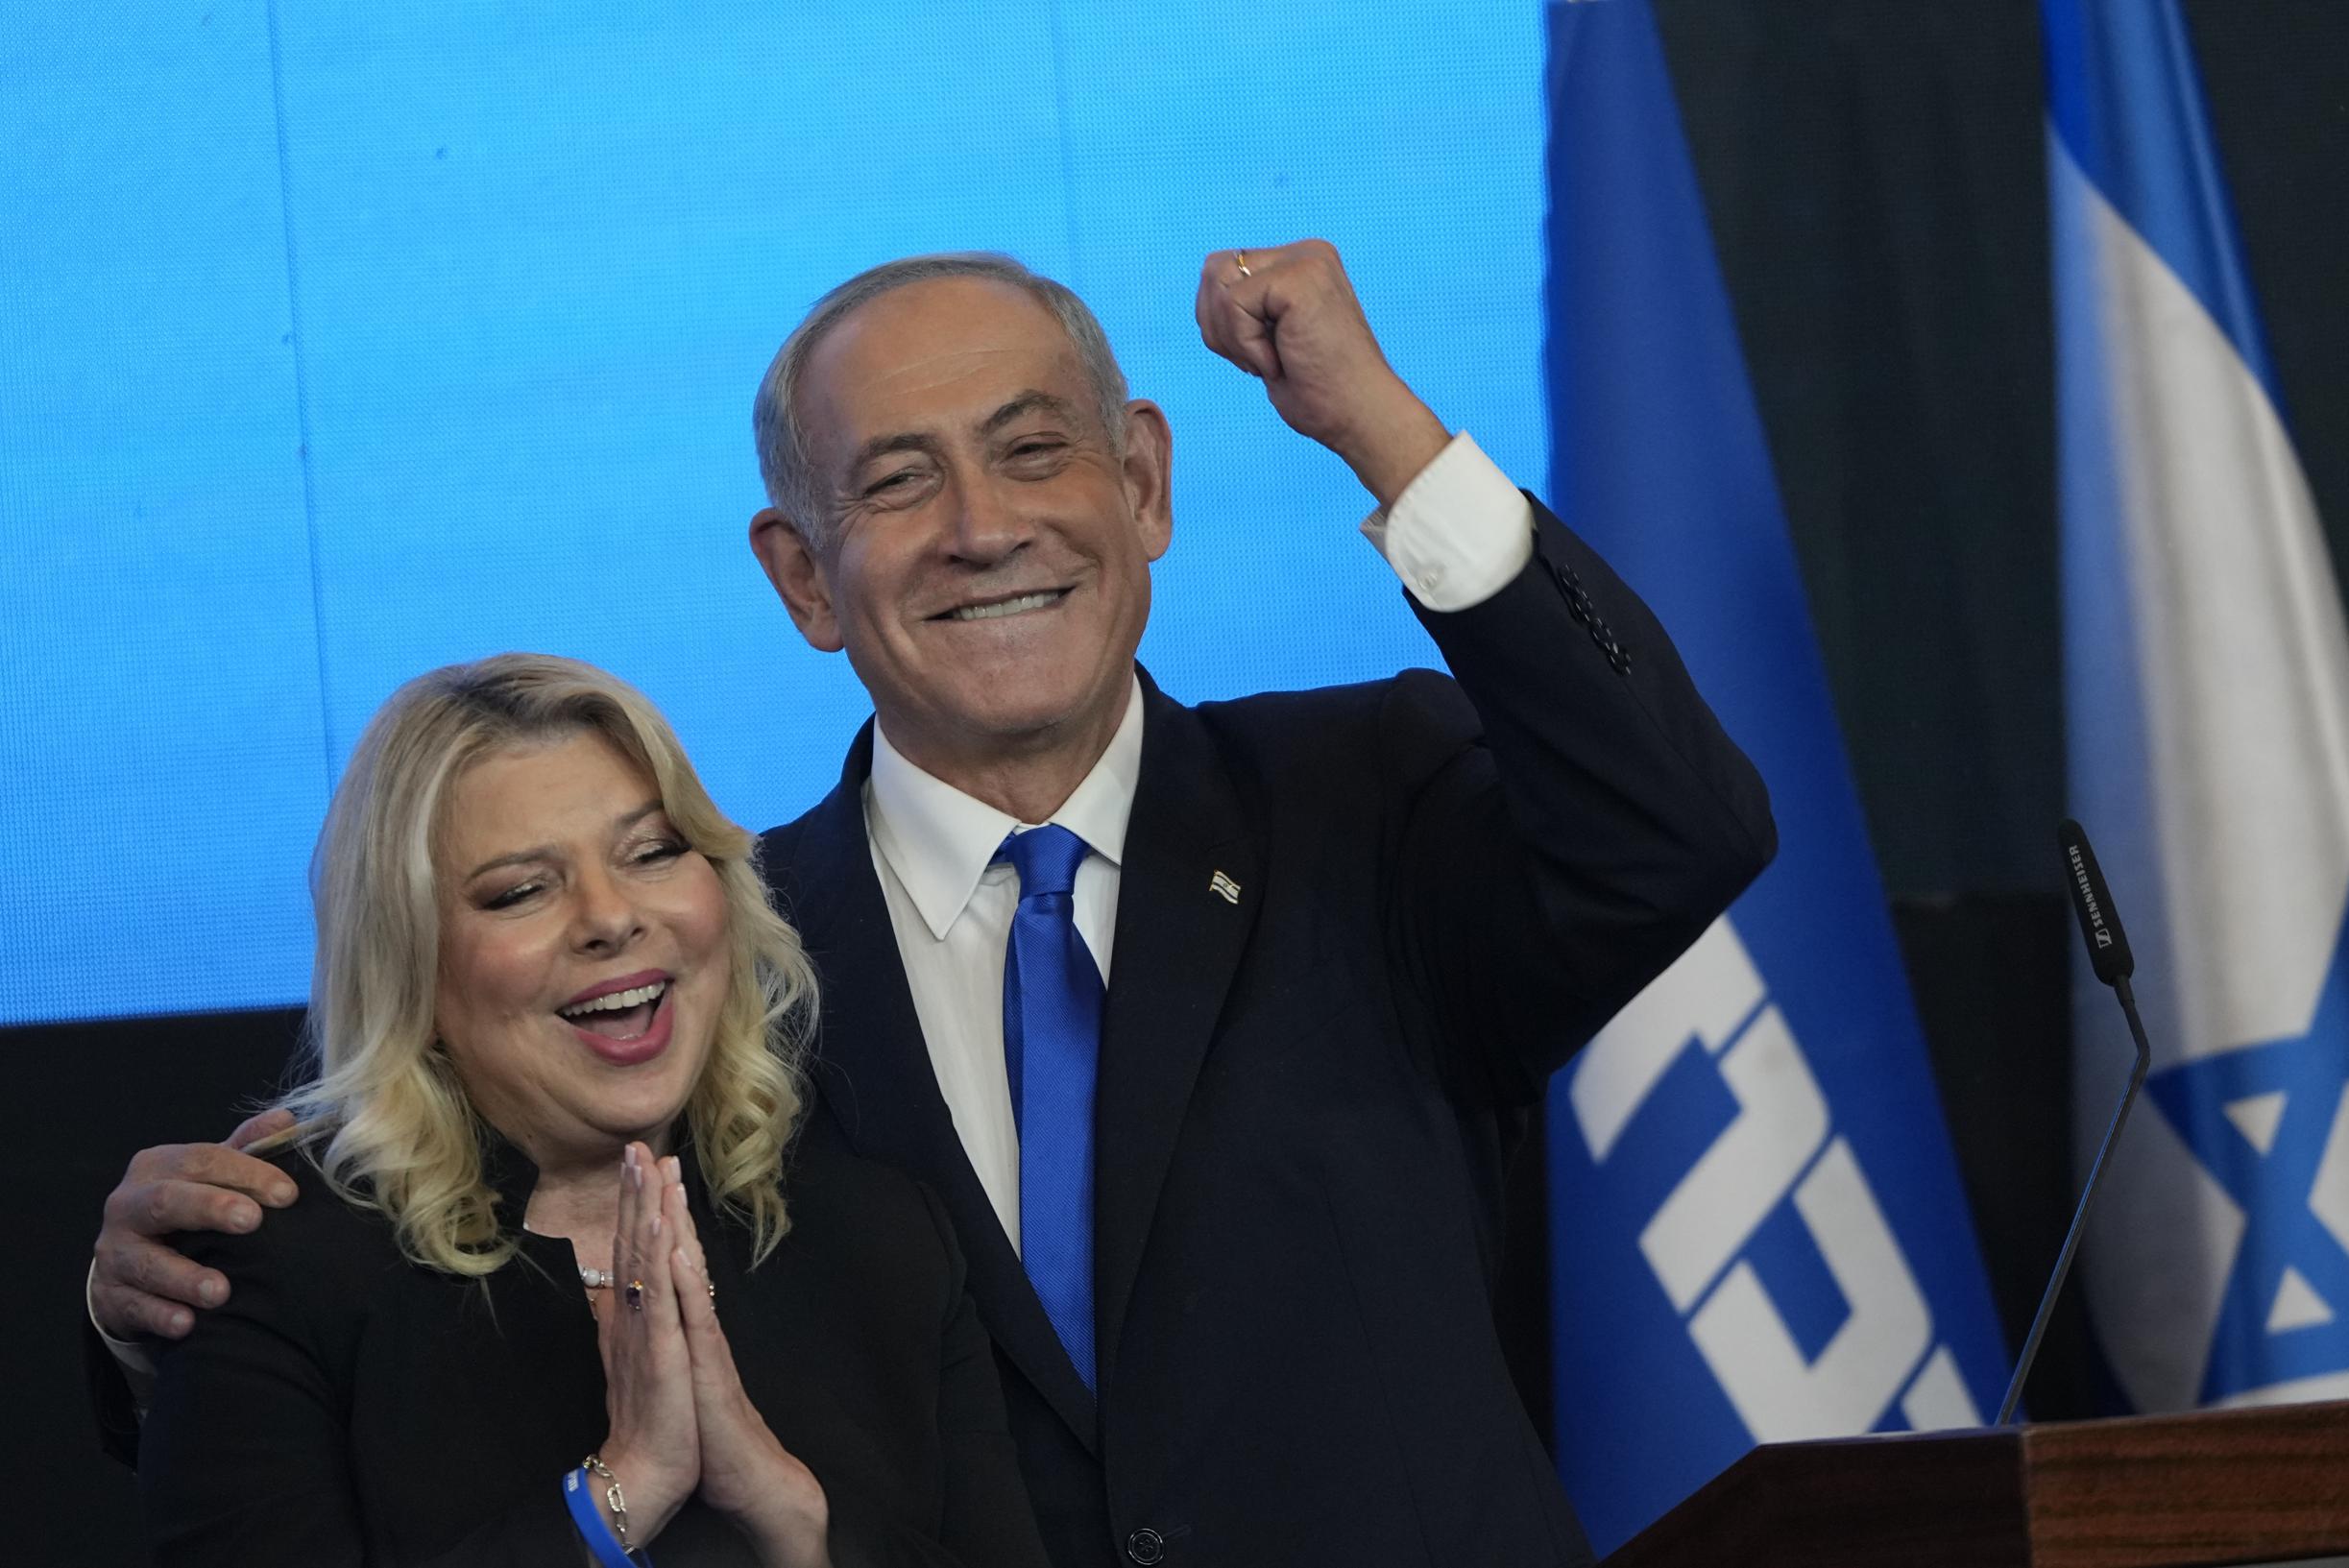 97 percent of votes counted: ex-Prime Minister Netanyahu heads for Israeli election victory